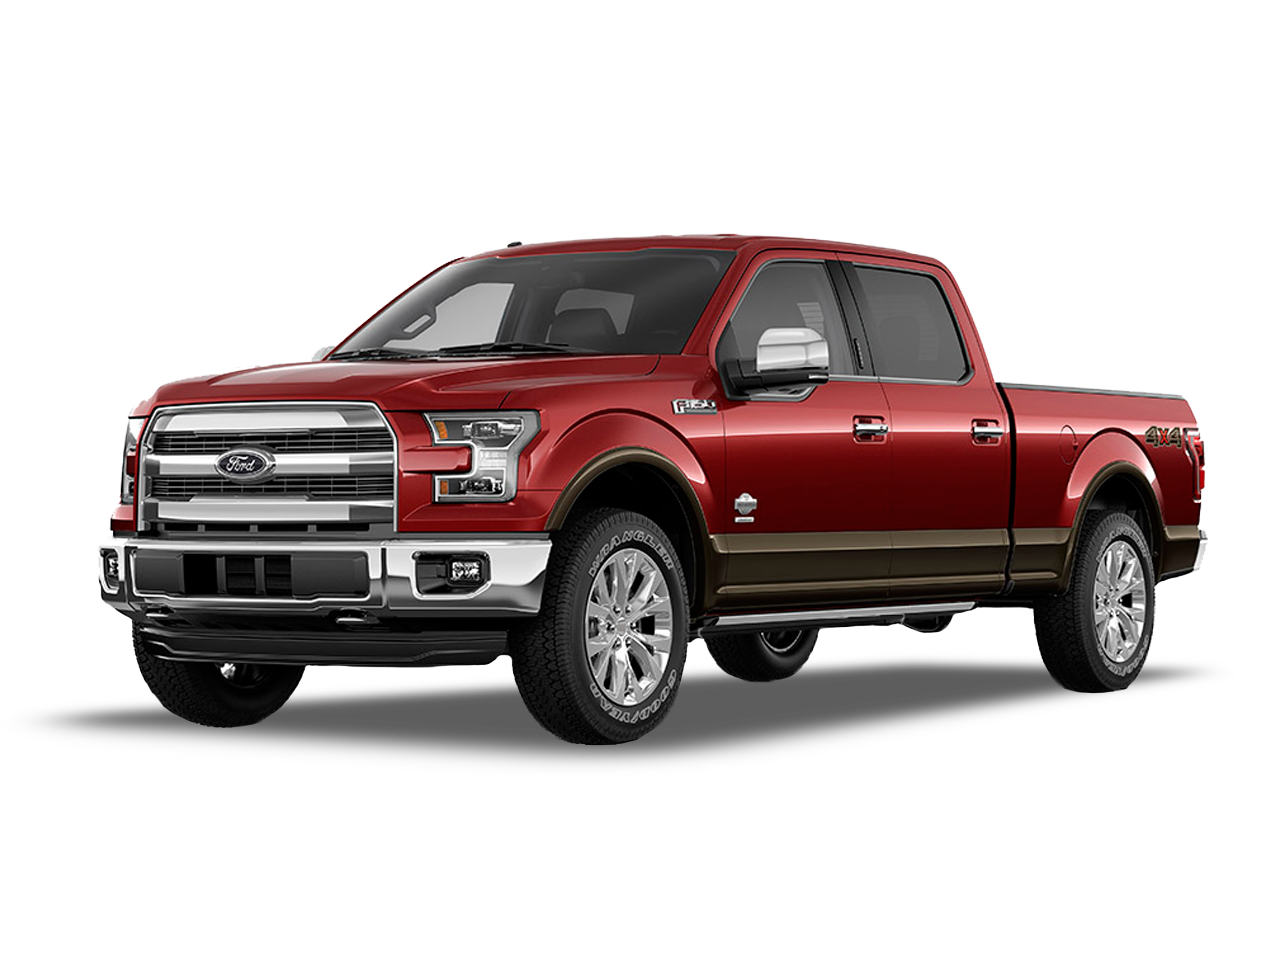 Amazing 2015 Ford F-150 Pictures & Backgrounds